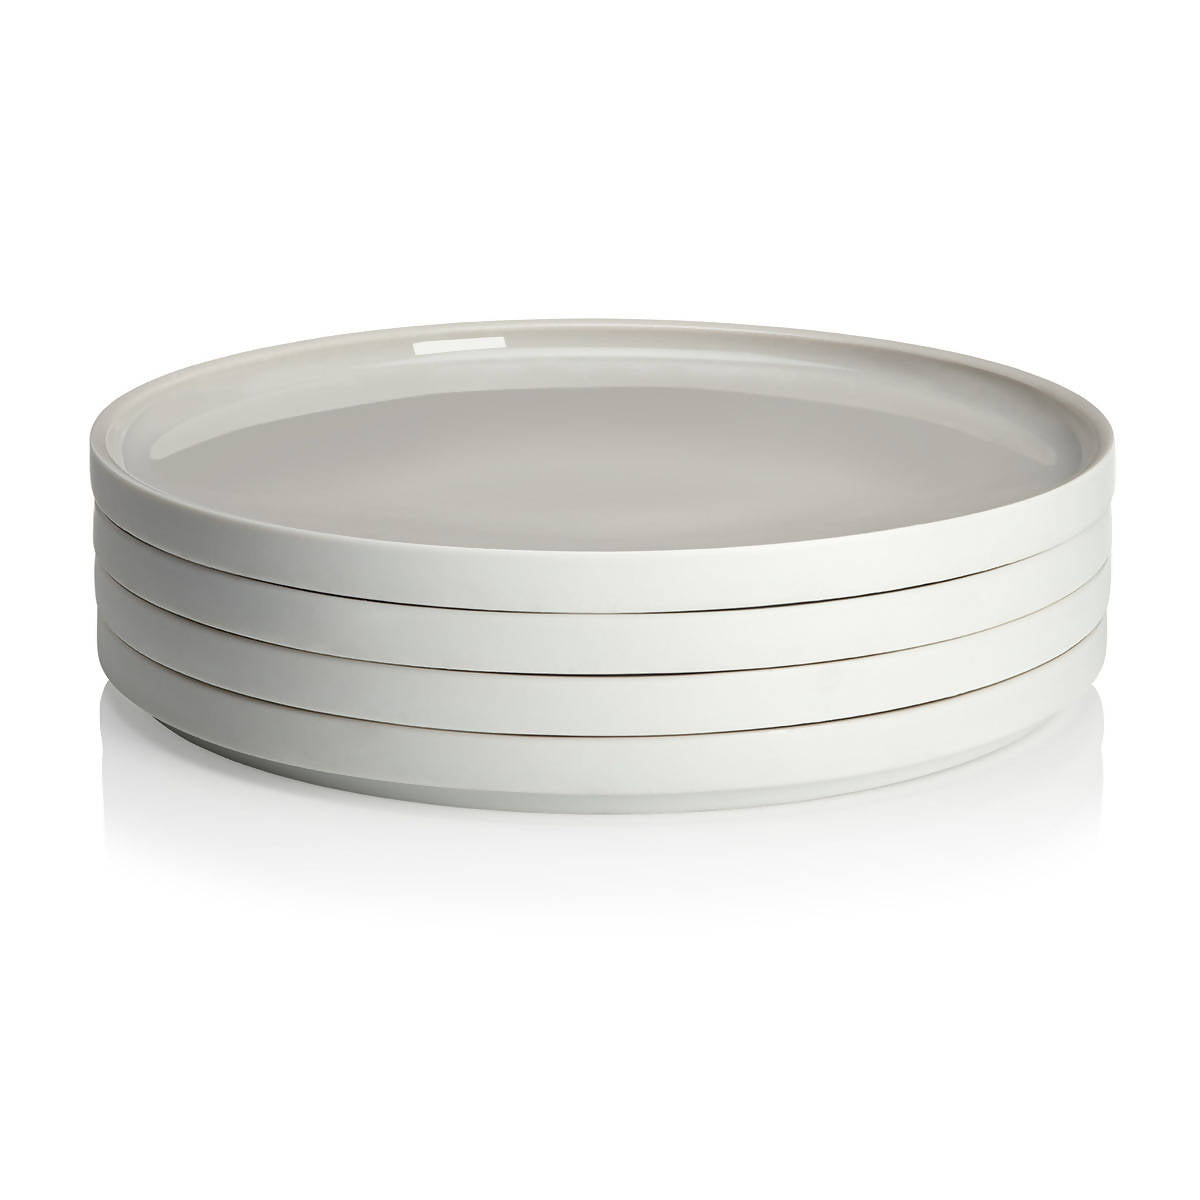 L'Econome by STARCK - 9.4" Plates (set of 4)